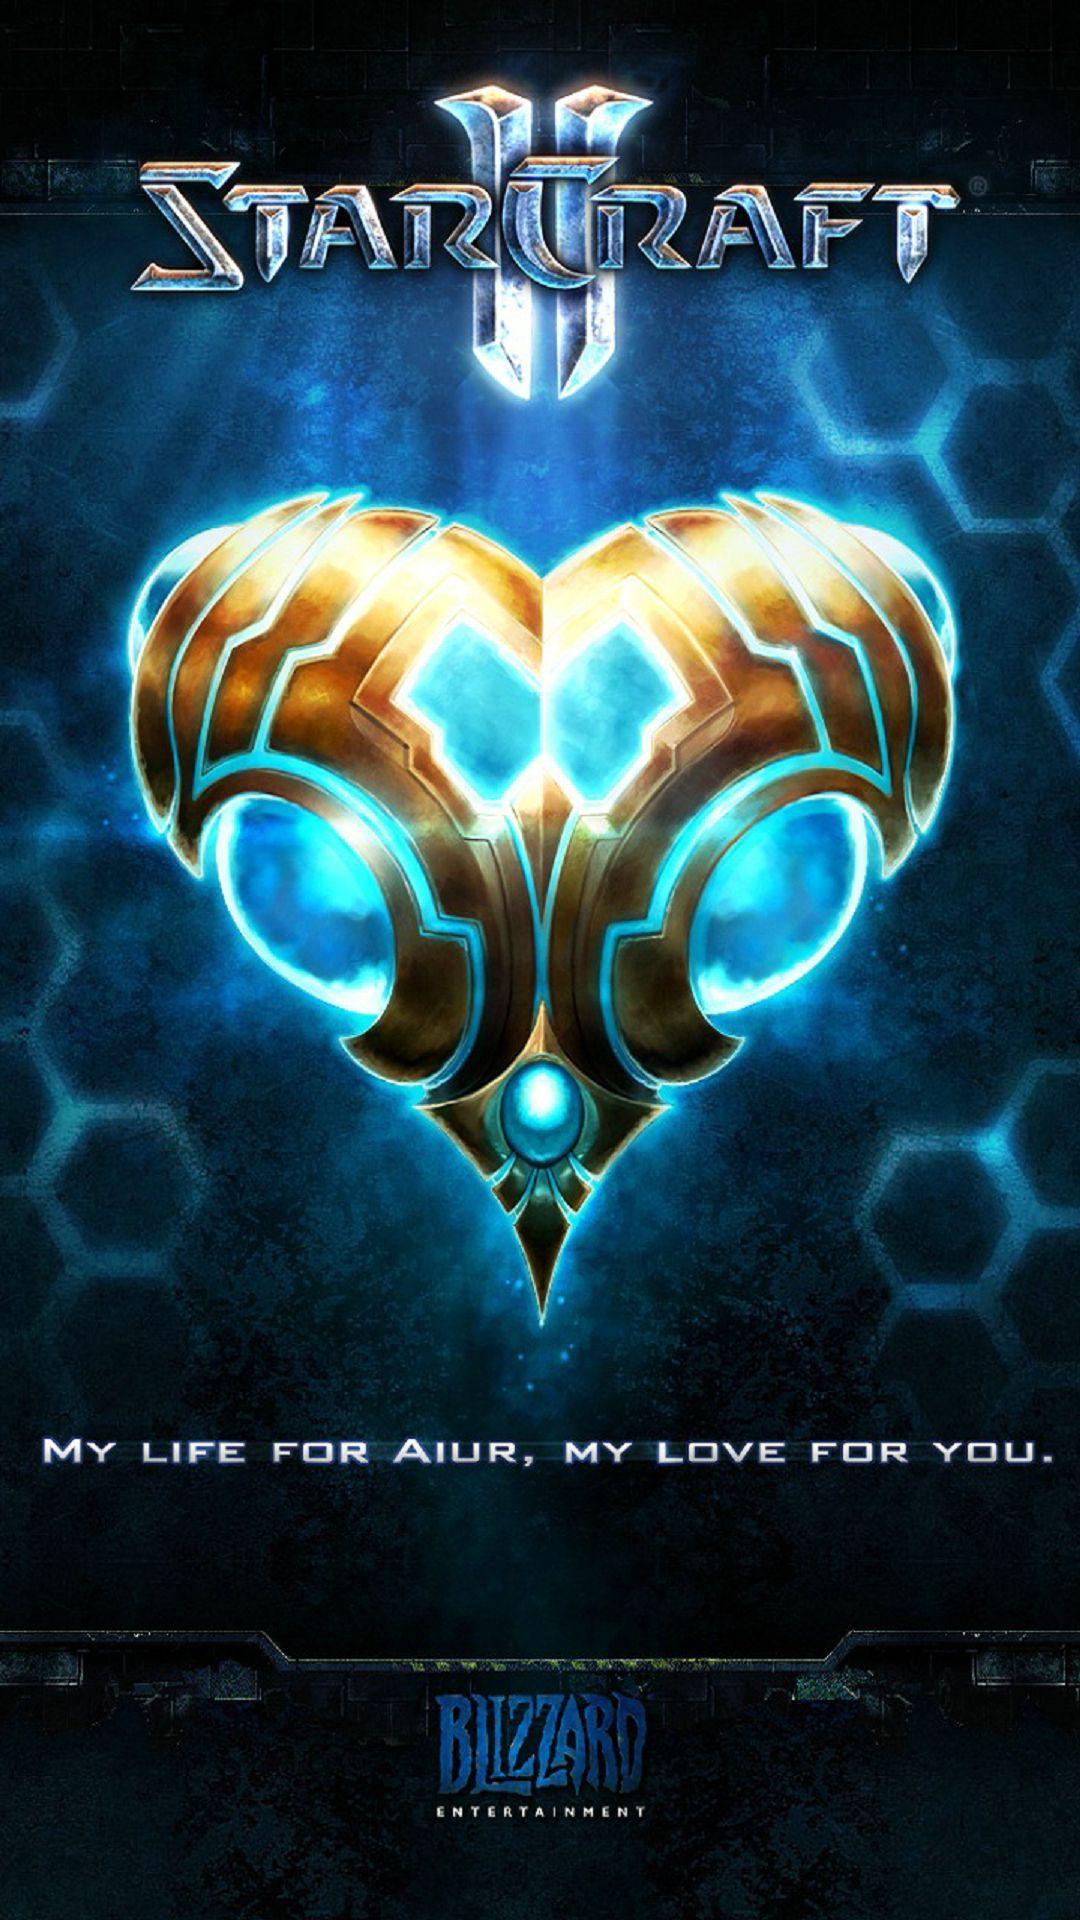 Starcraft 2 Protoss Android Wallpaper free download